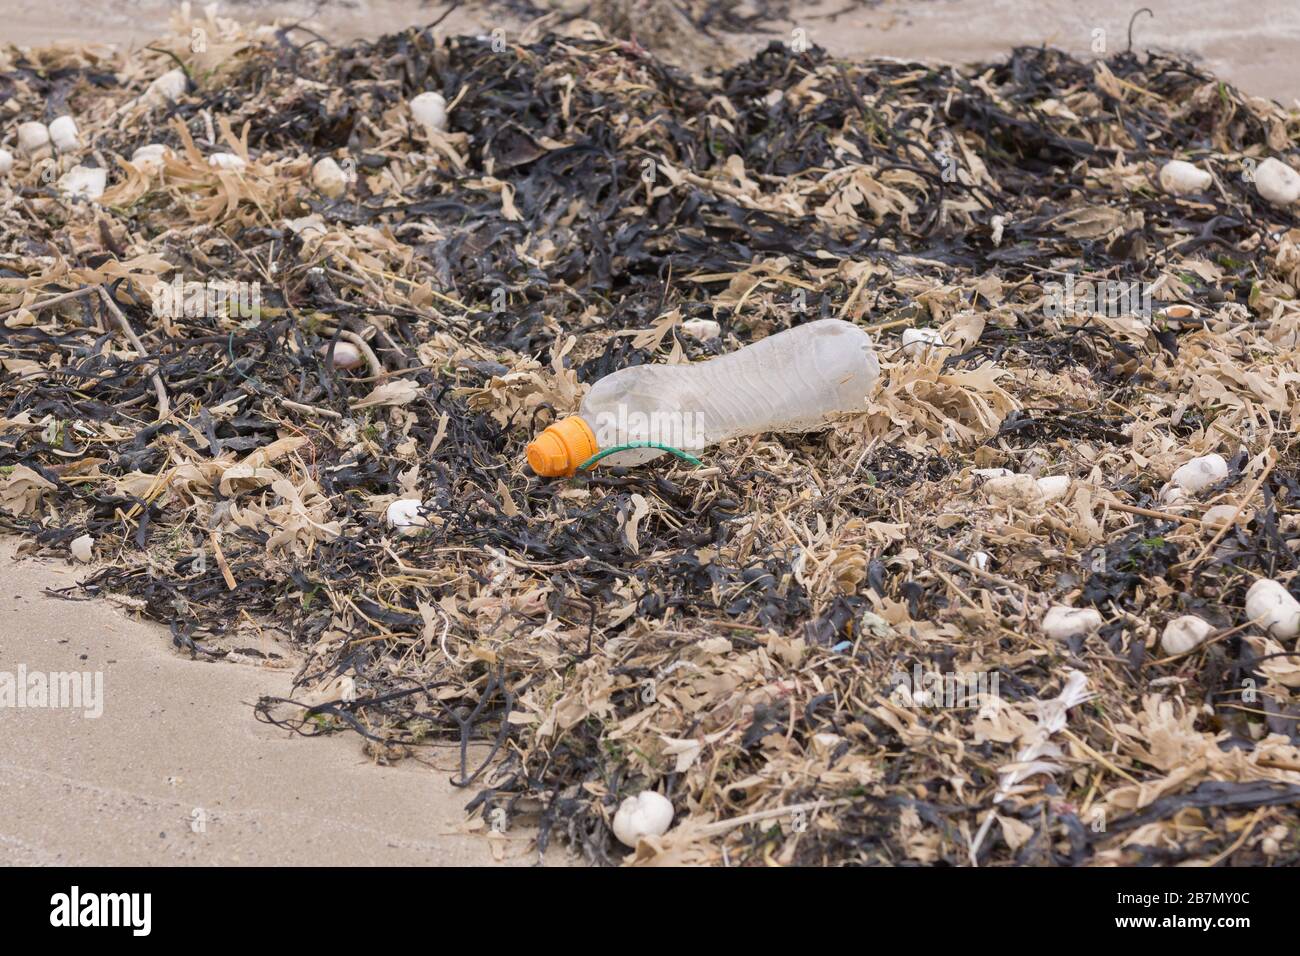 Plastic drink bottle surrounded by dead seaweed and shells on beach an example of the many pieces of garbage in the sea Stock Photo